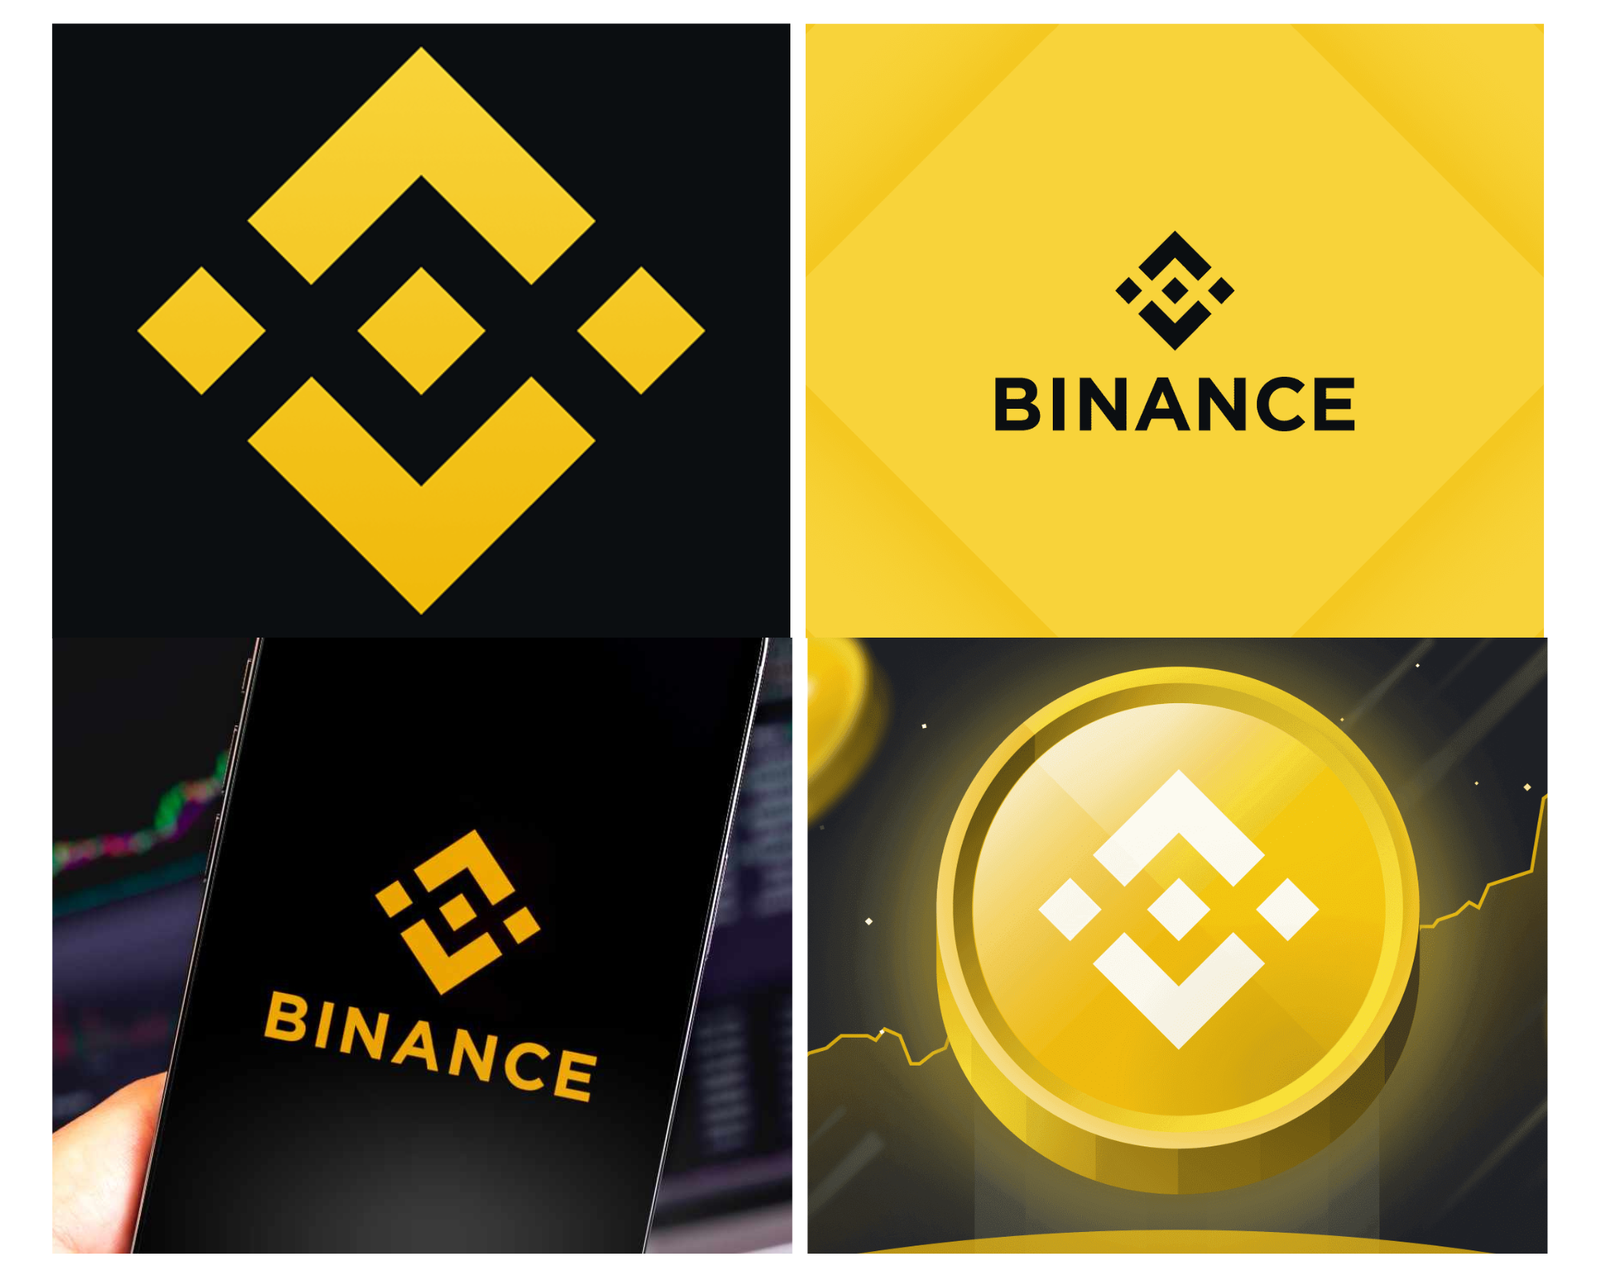 Binance and Cryptocurrency